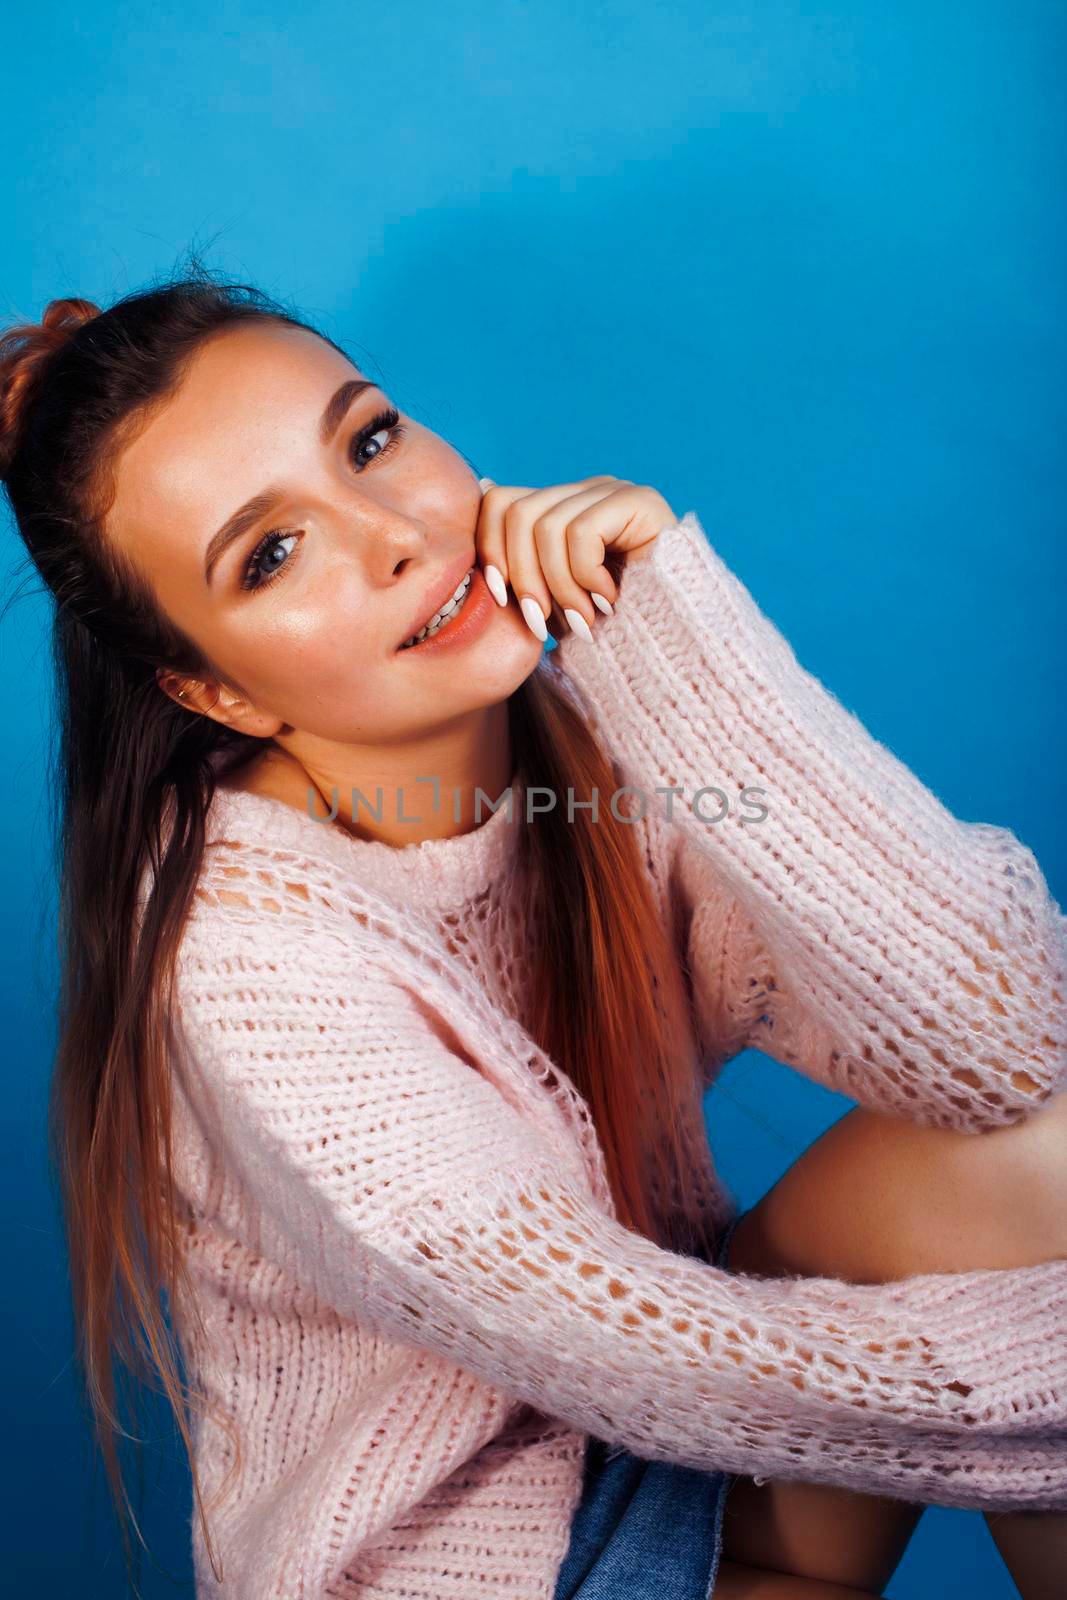 young pretty modern hipster girl posing emotional happy on blue background, lifestyle people concept close up